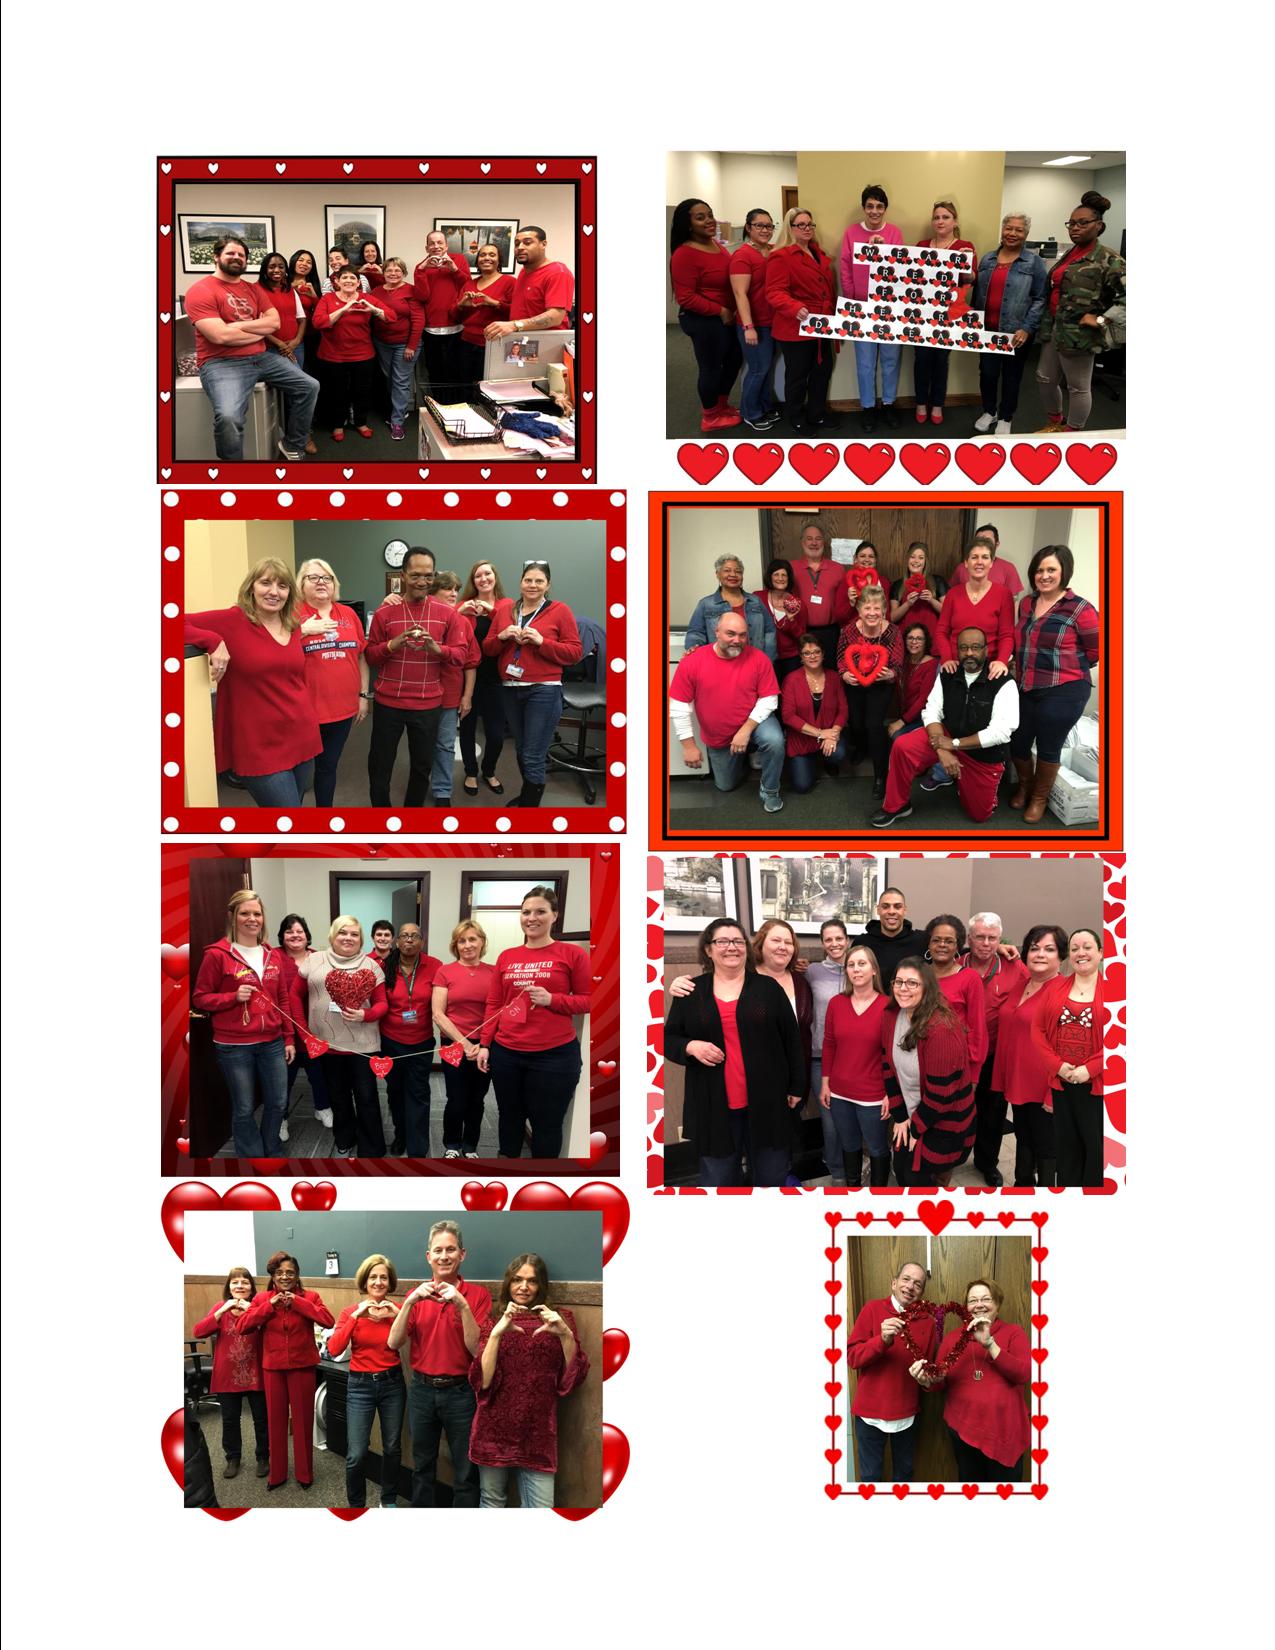 Collage of photos of Collector of Revenue employees wearing red on Feb. 3, 2017 -- National Wear Red Day